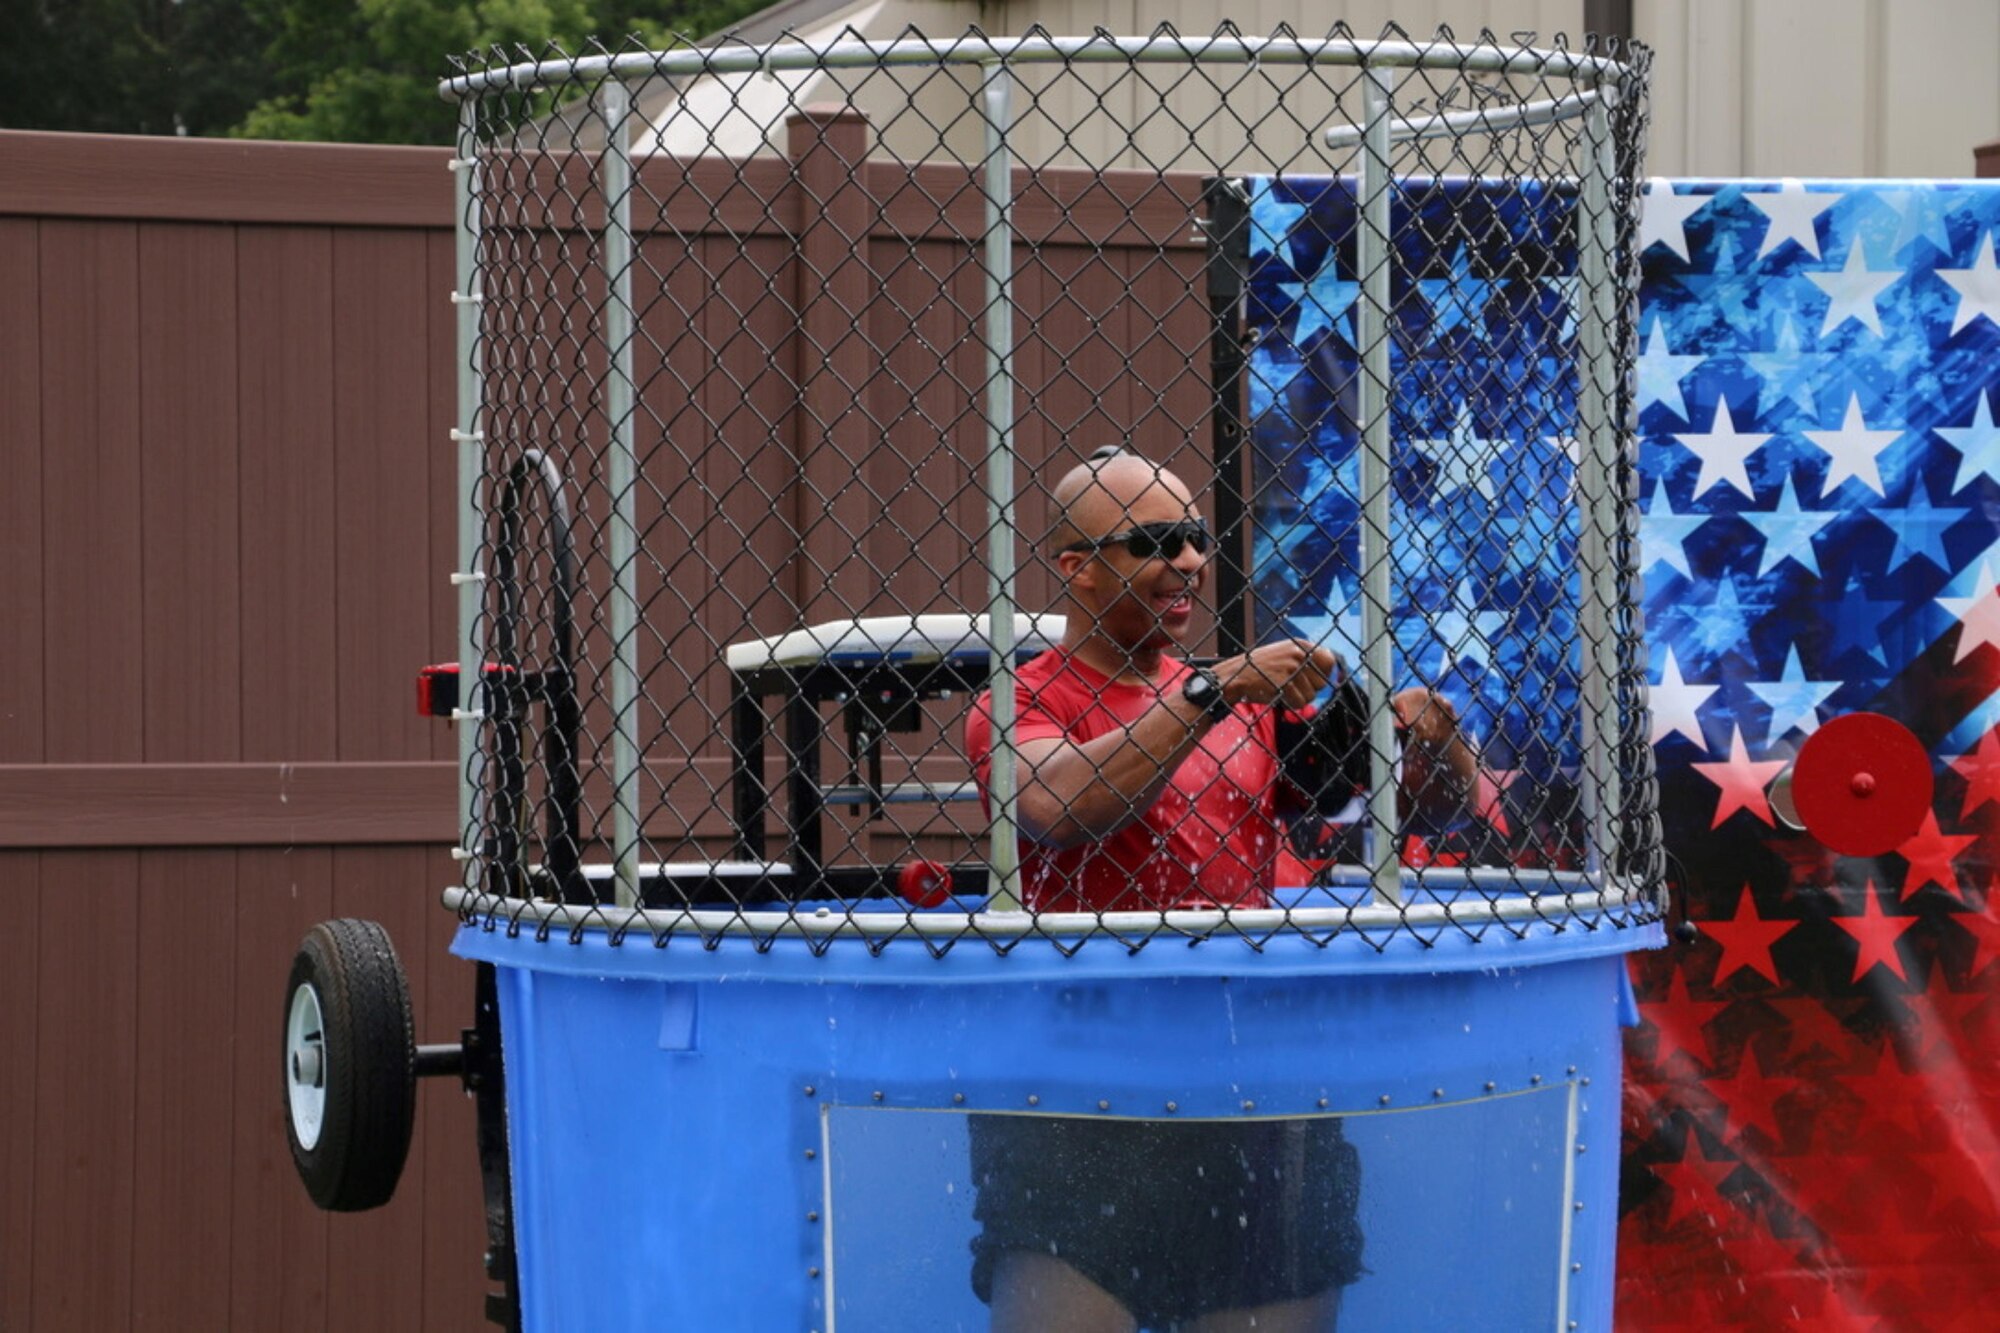 Arnold Engineering Development Complex Commander Col. Randel Gordon is soaked after taking a turn in the dunking booth at the first-ever Arnold Air Force Base Services SummerFest Aug. 12, 2023, at the Gossick Leadership Center on Arnold Air Force Base, Tenn. Along with the dunking booth, the event featured pie eating contests, a cardboard boat race, a car show, bounce houses and food trucks, among other activities. (U.S. Air Force photo by Jodee George)